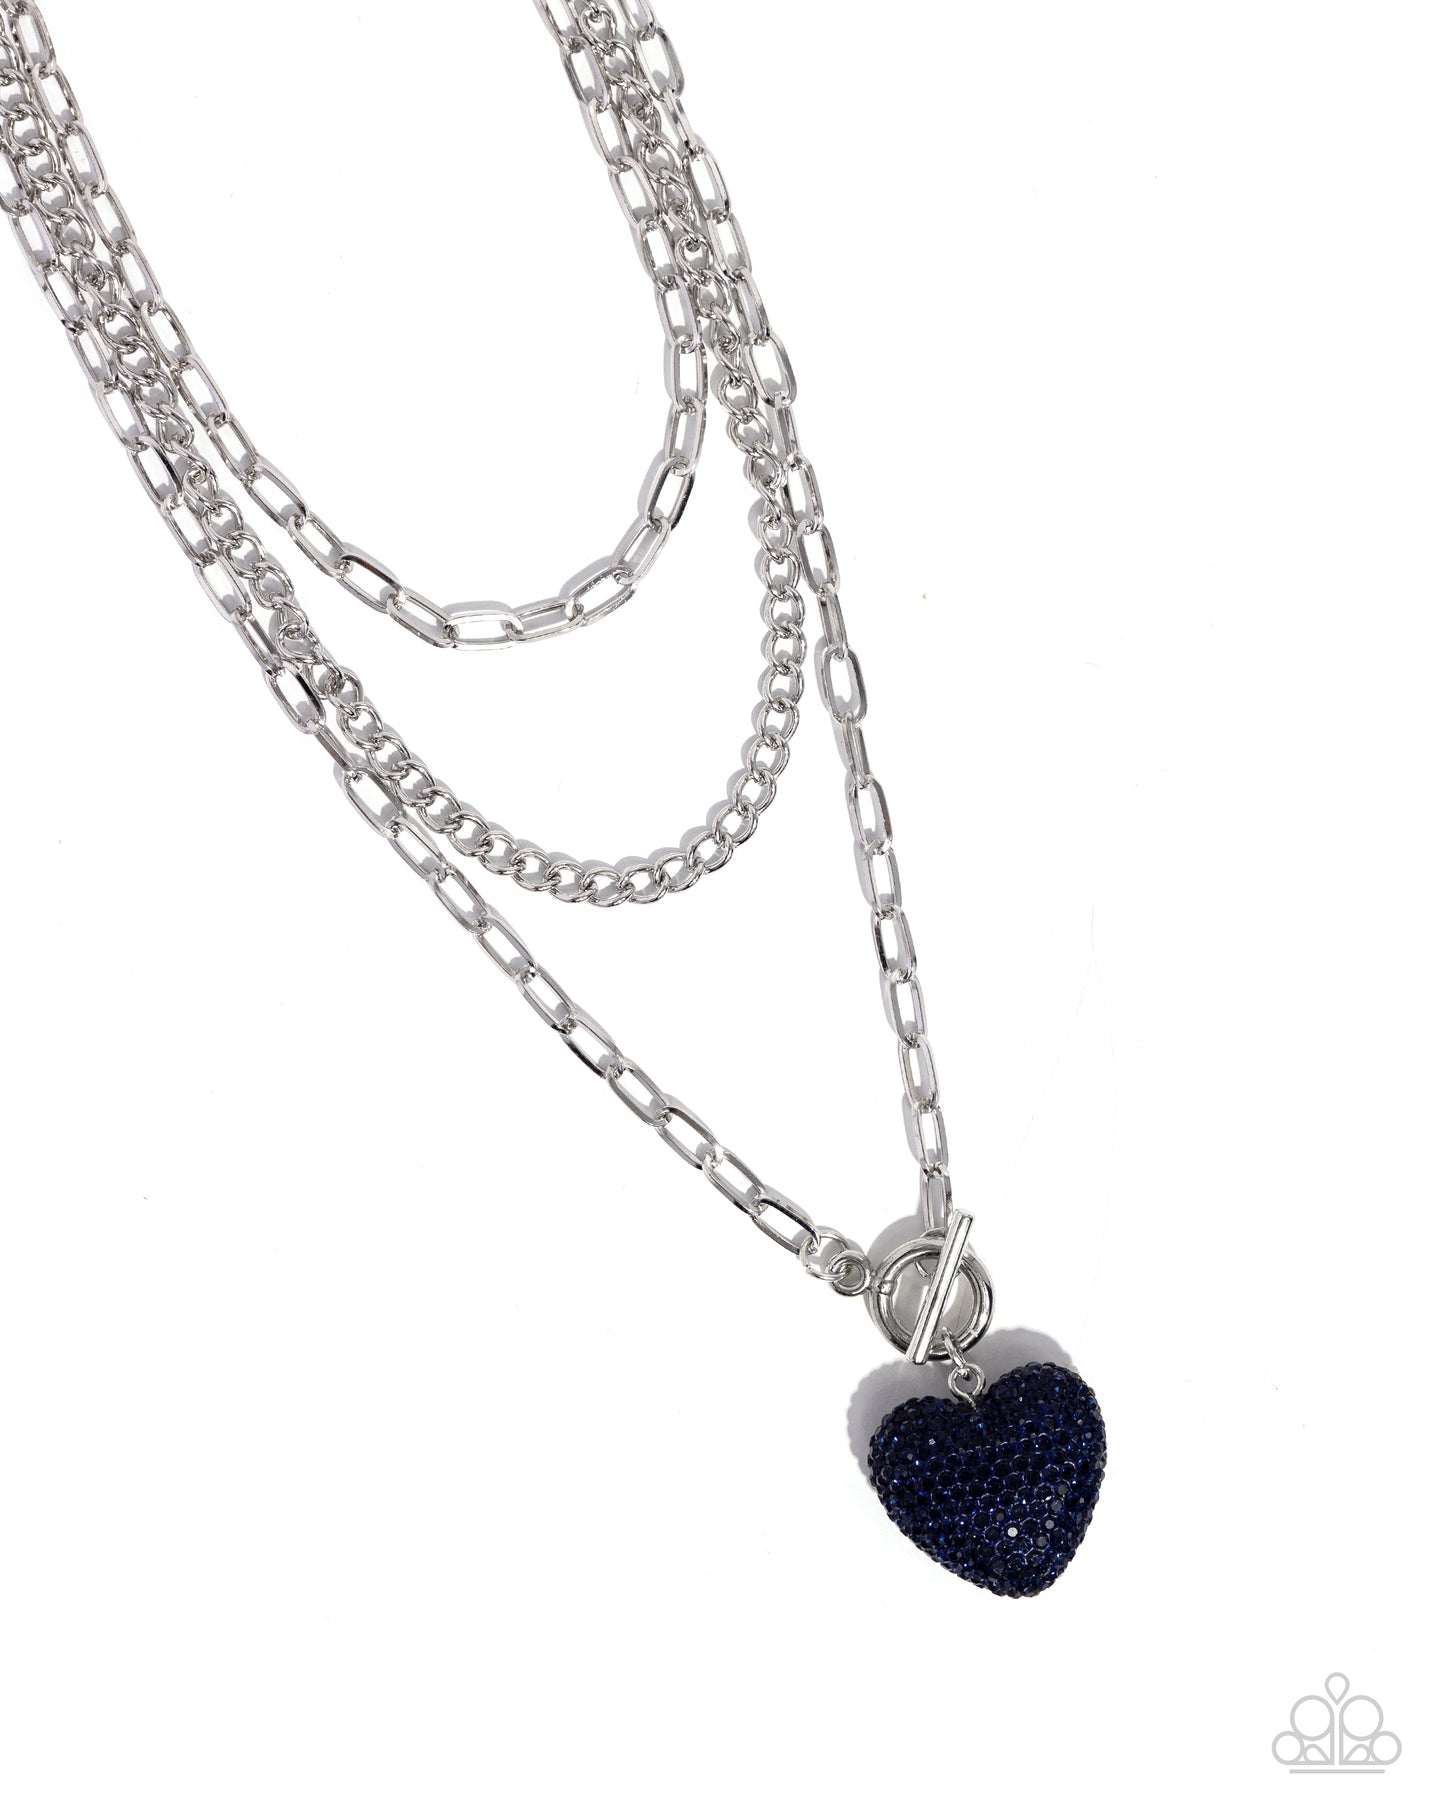 <p>Three mismatched silver chains coalesce and layer down the chest for a monochromatic display. A Montana-beaded heart charm dangles from the lowermost chain for a radically romantic finish. Features an adjustable clasp closure.</p> <p><i> Sold as one individual necklace. Includes one pair of matching earrings.</i></p>